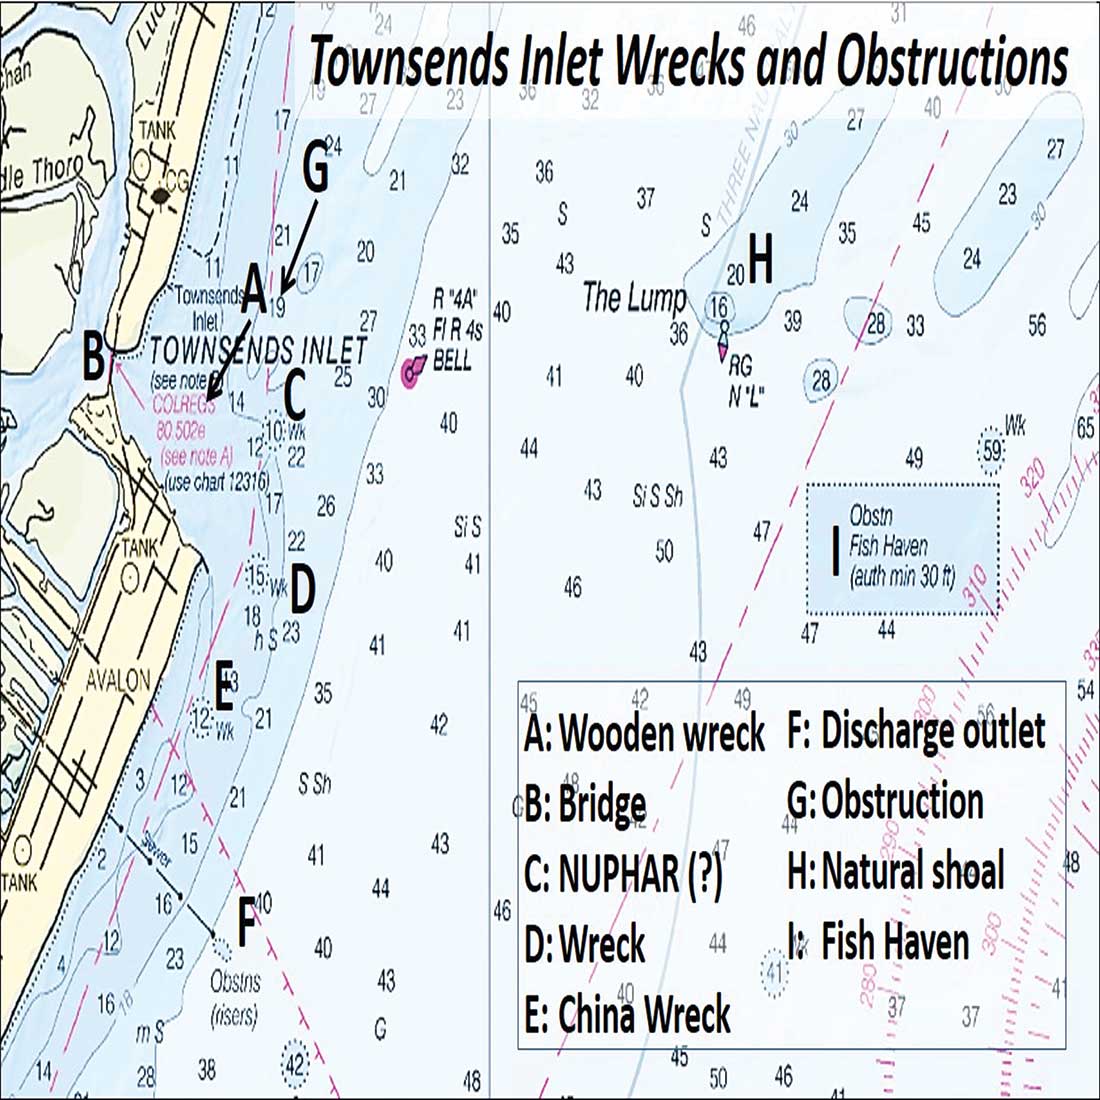 The author’s submitted image, Townsends Inlet Wrecks and Obstructions, shows the locations of many of the pieces referenced in the article.